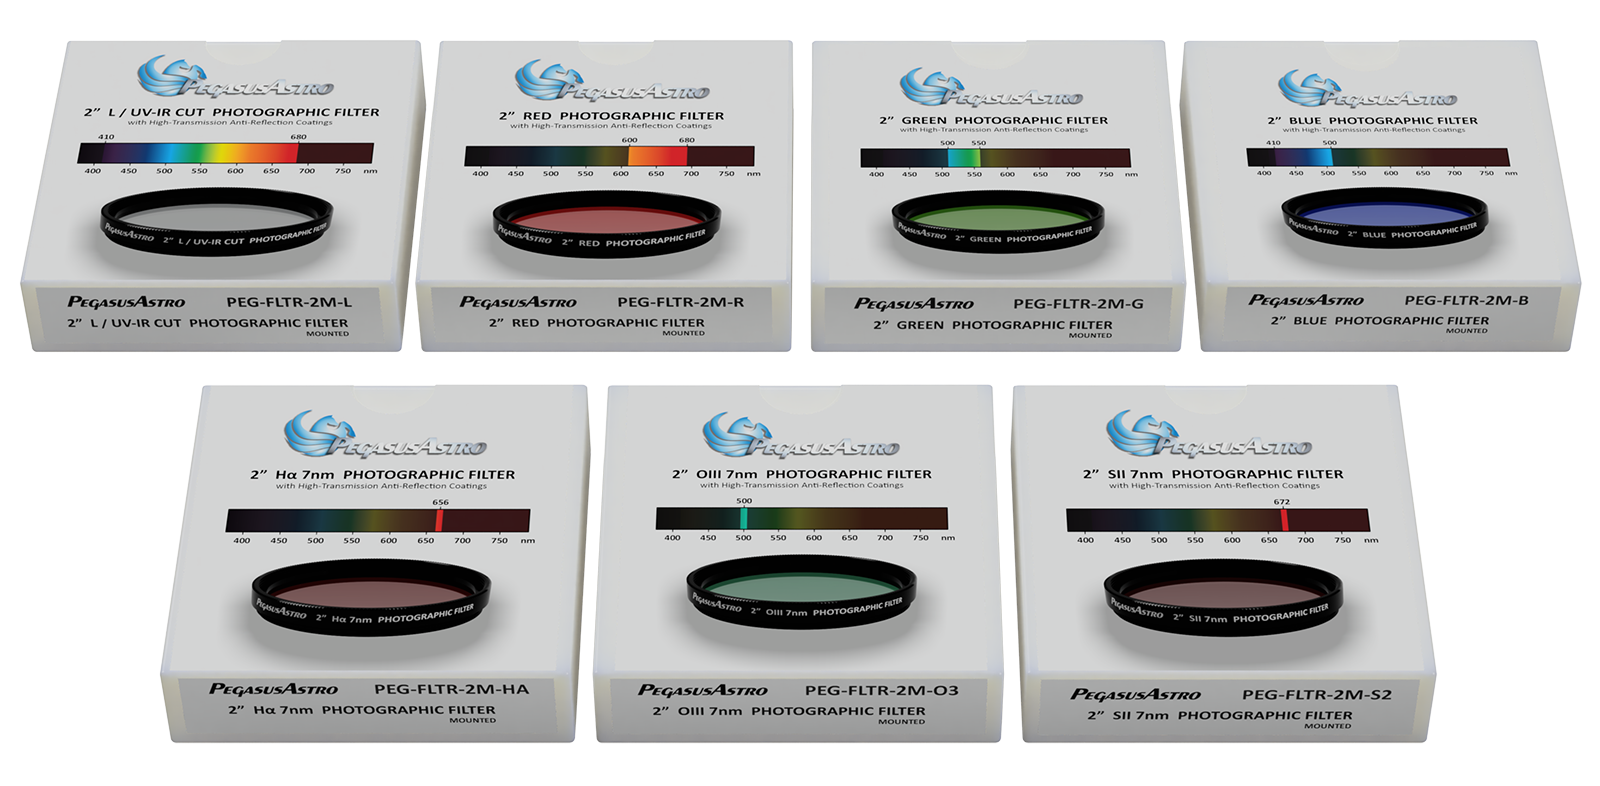 Pegasus Astro Photographic Filter - SII 2" Mounted Filter